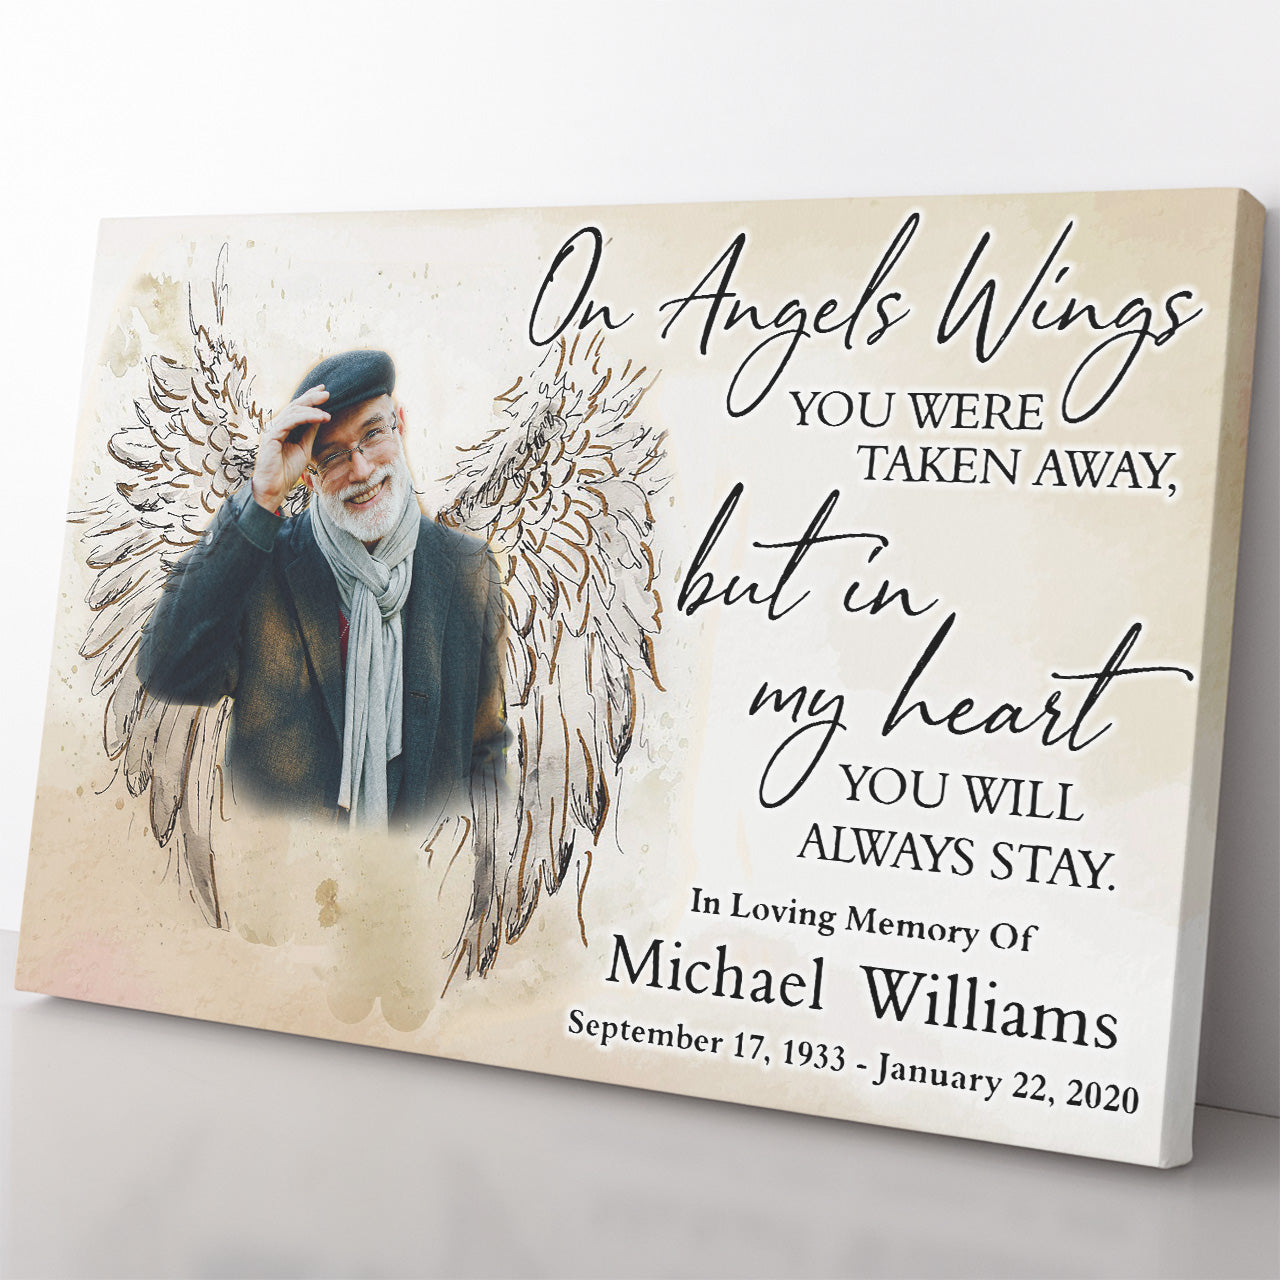 Sympathy Canvas Gift for Loss of Loved One, On Angels Wings Family Memorial Gift Canvas